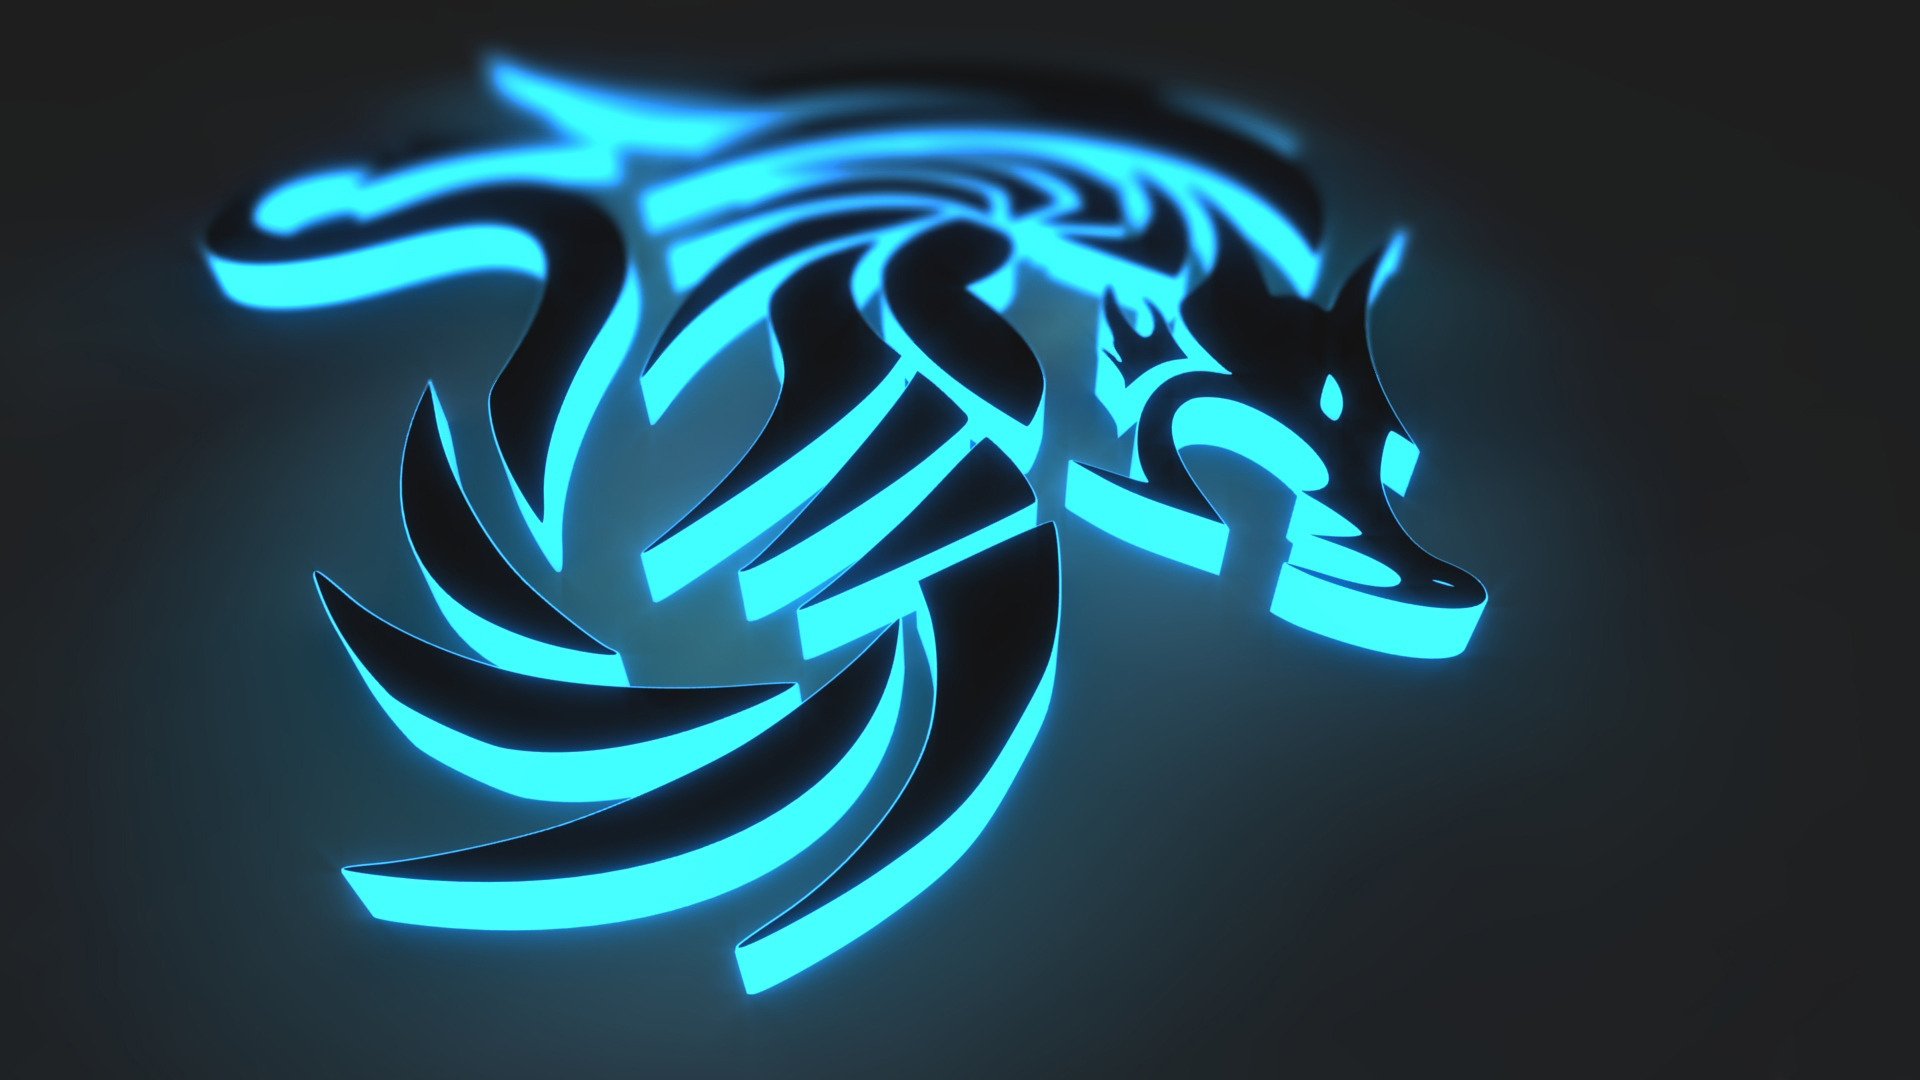 black, 3d, wolf, cgi, glow, abstract, blue, dark cell phone wallpapers